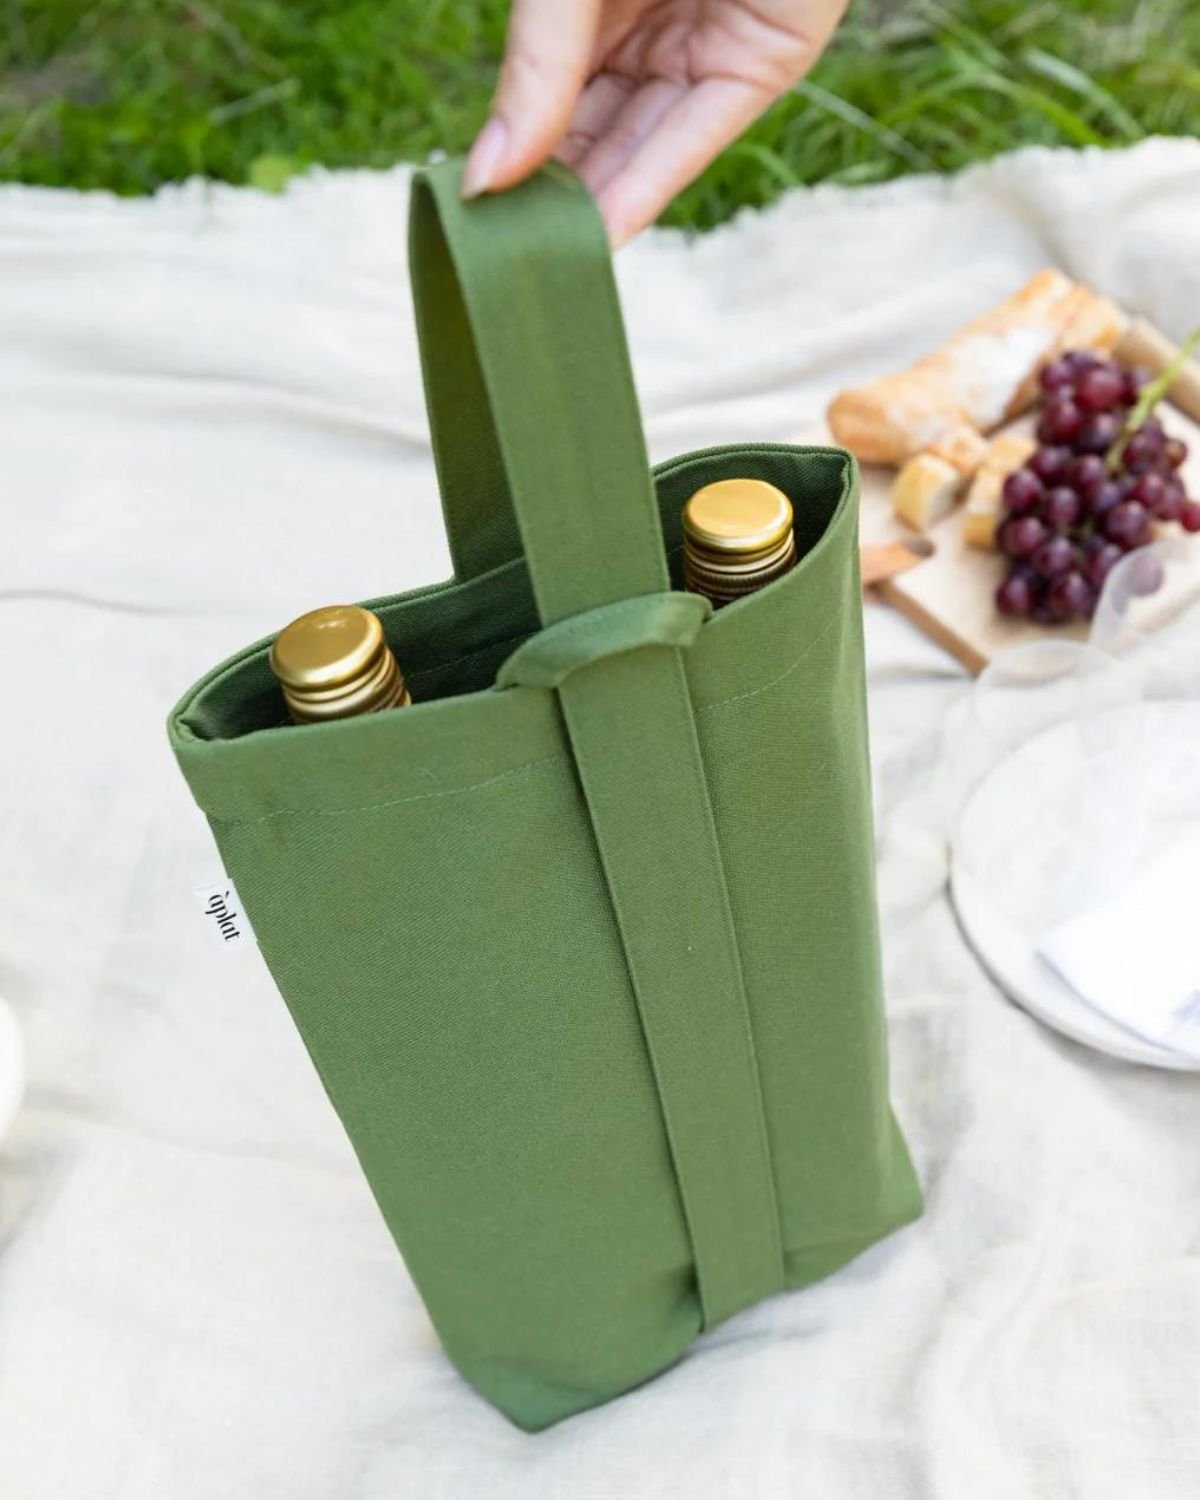 16 Sustainable Gift Ideas For The Party Host | Conscious Fashion Collective